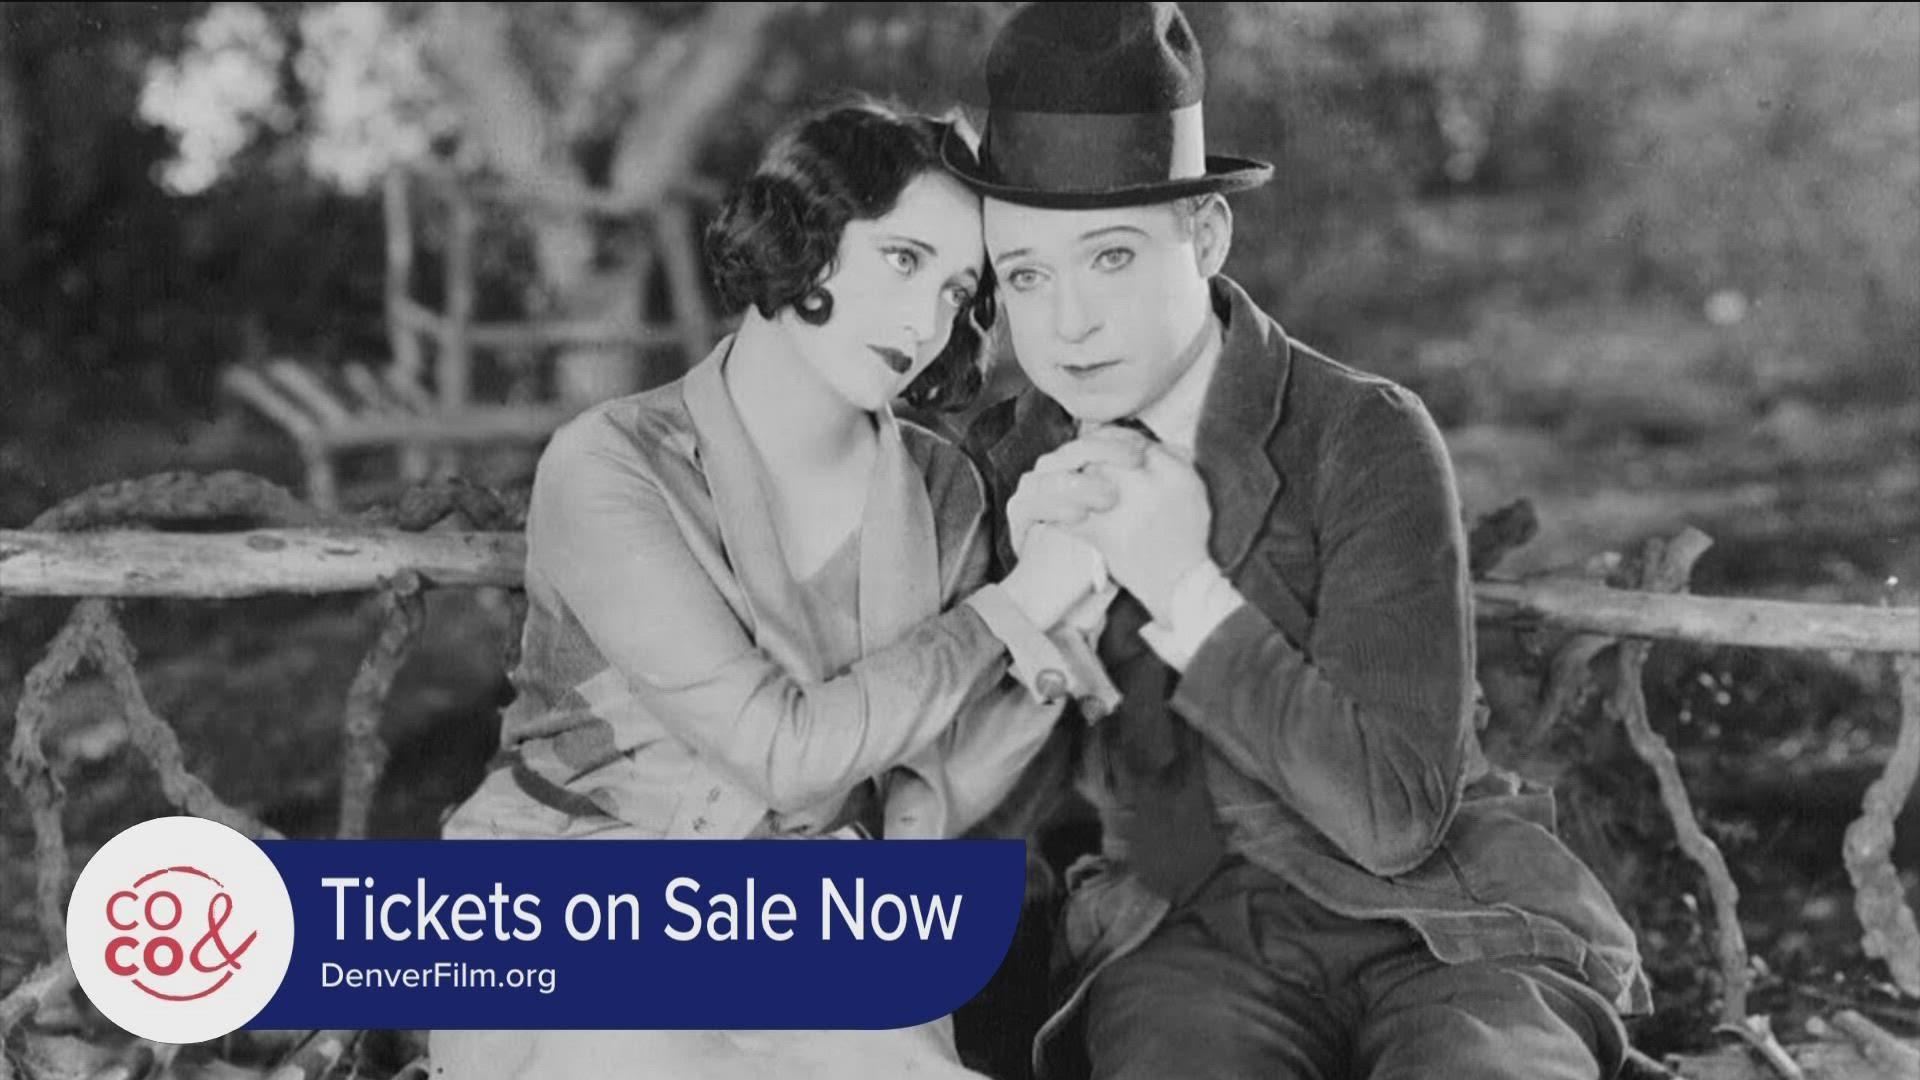 The Denver Silent Film Festival is back at the Sturm Family Auditorium at the Denver Botanic Gardens. Learn more and get your tickets at DenverFilm.org.